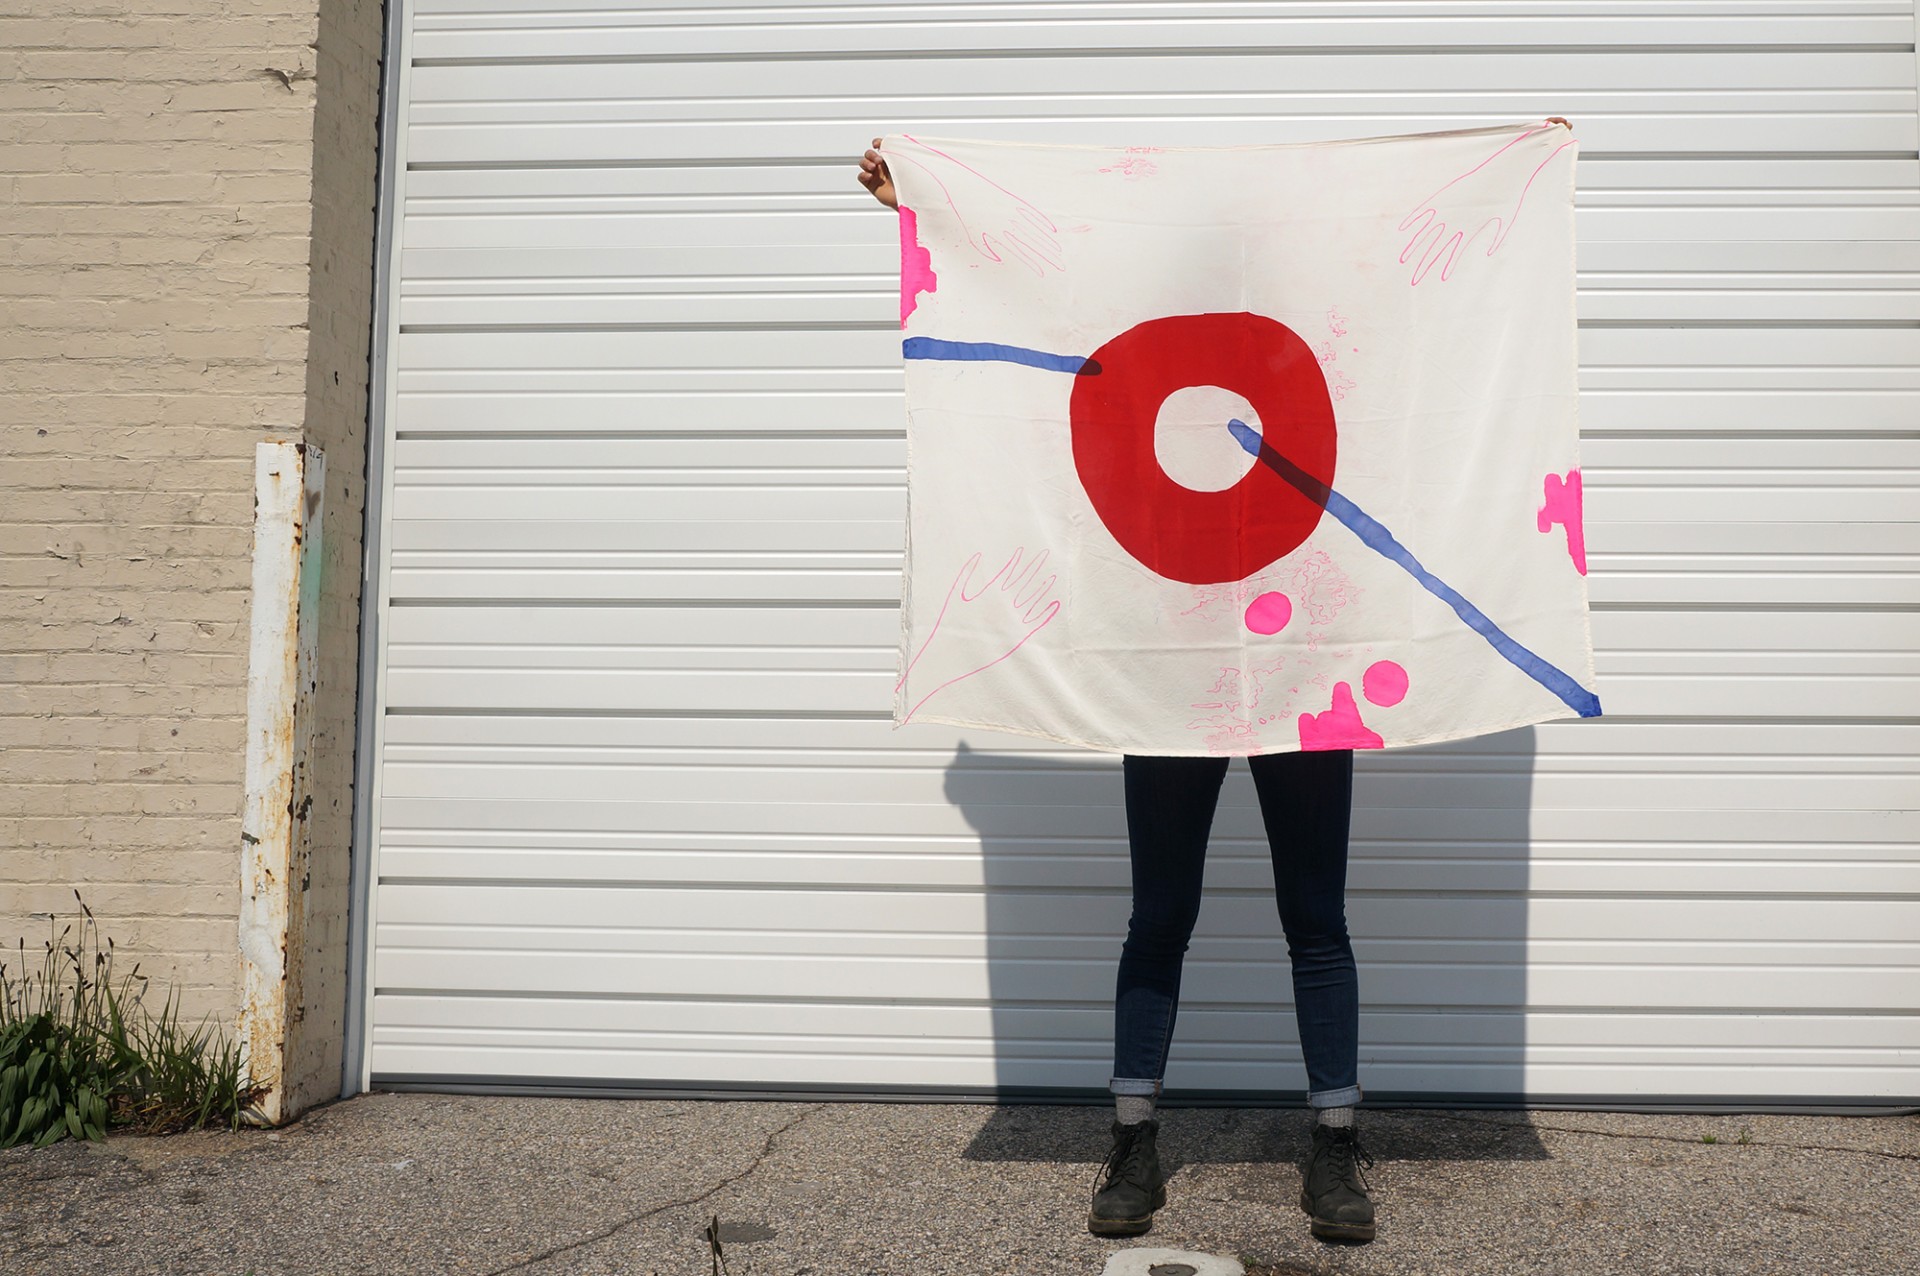 Model holding scarf against wall. Scarf design include bold red circle, pink squiggles and blue lines. 